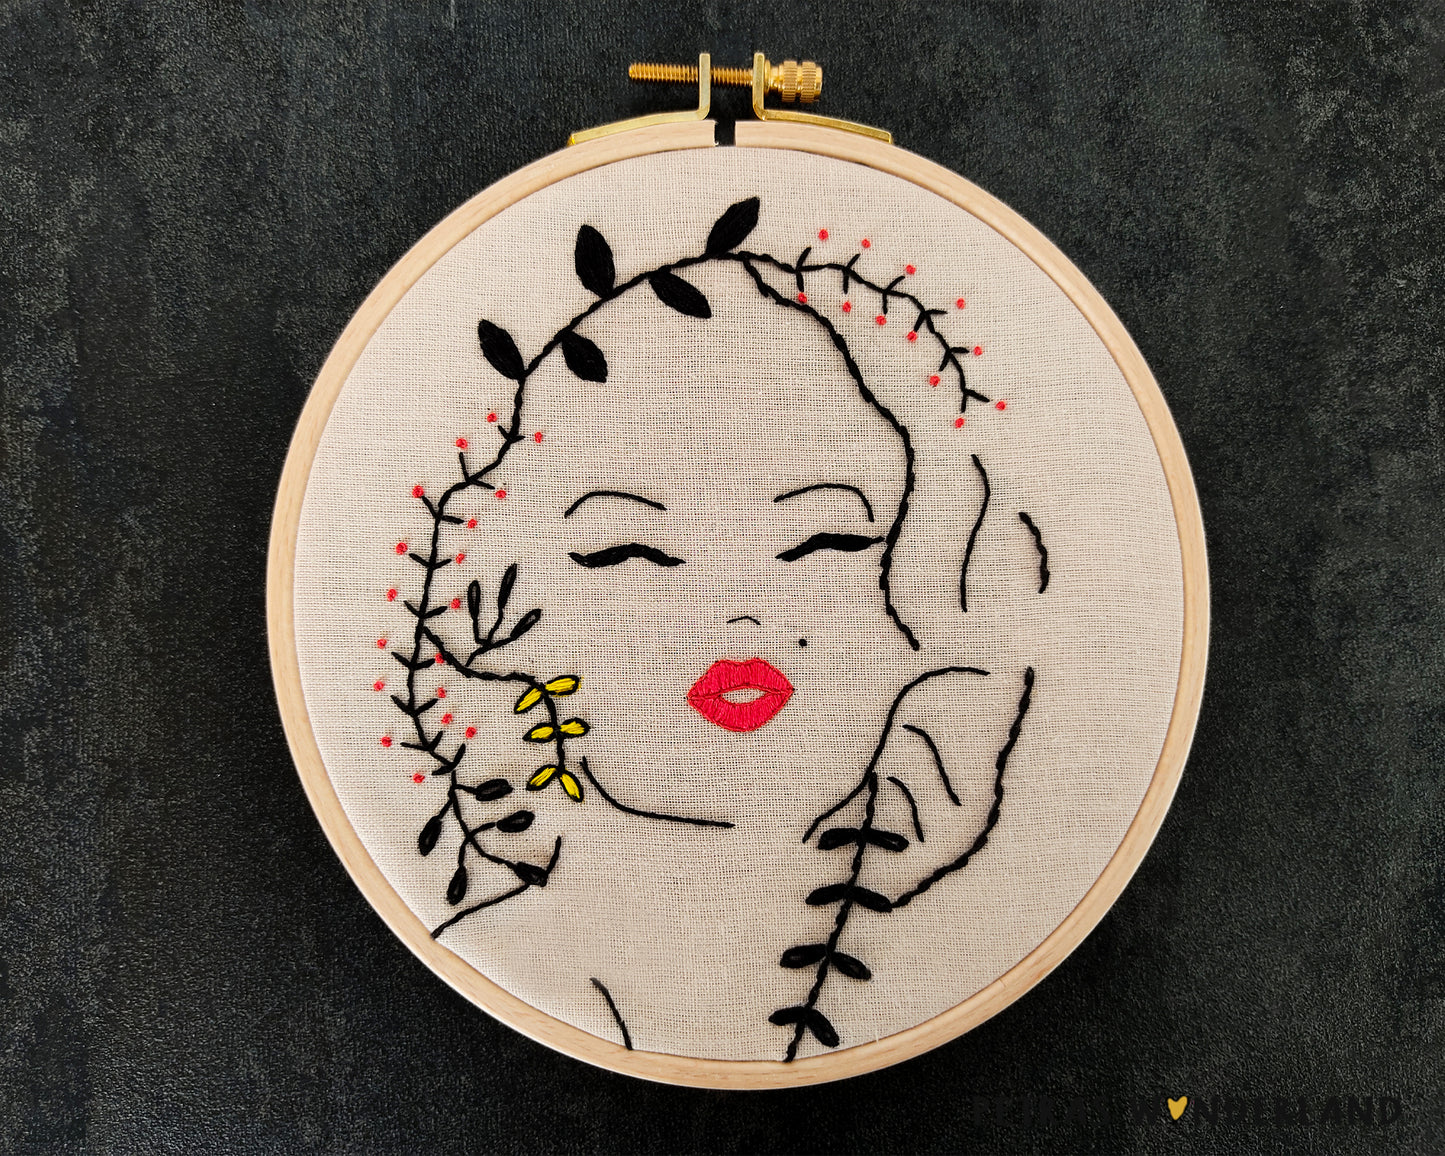 Marilyn Monroe - PDF embroidery pattern and tutorial 06